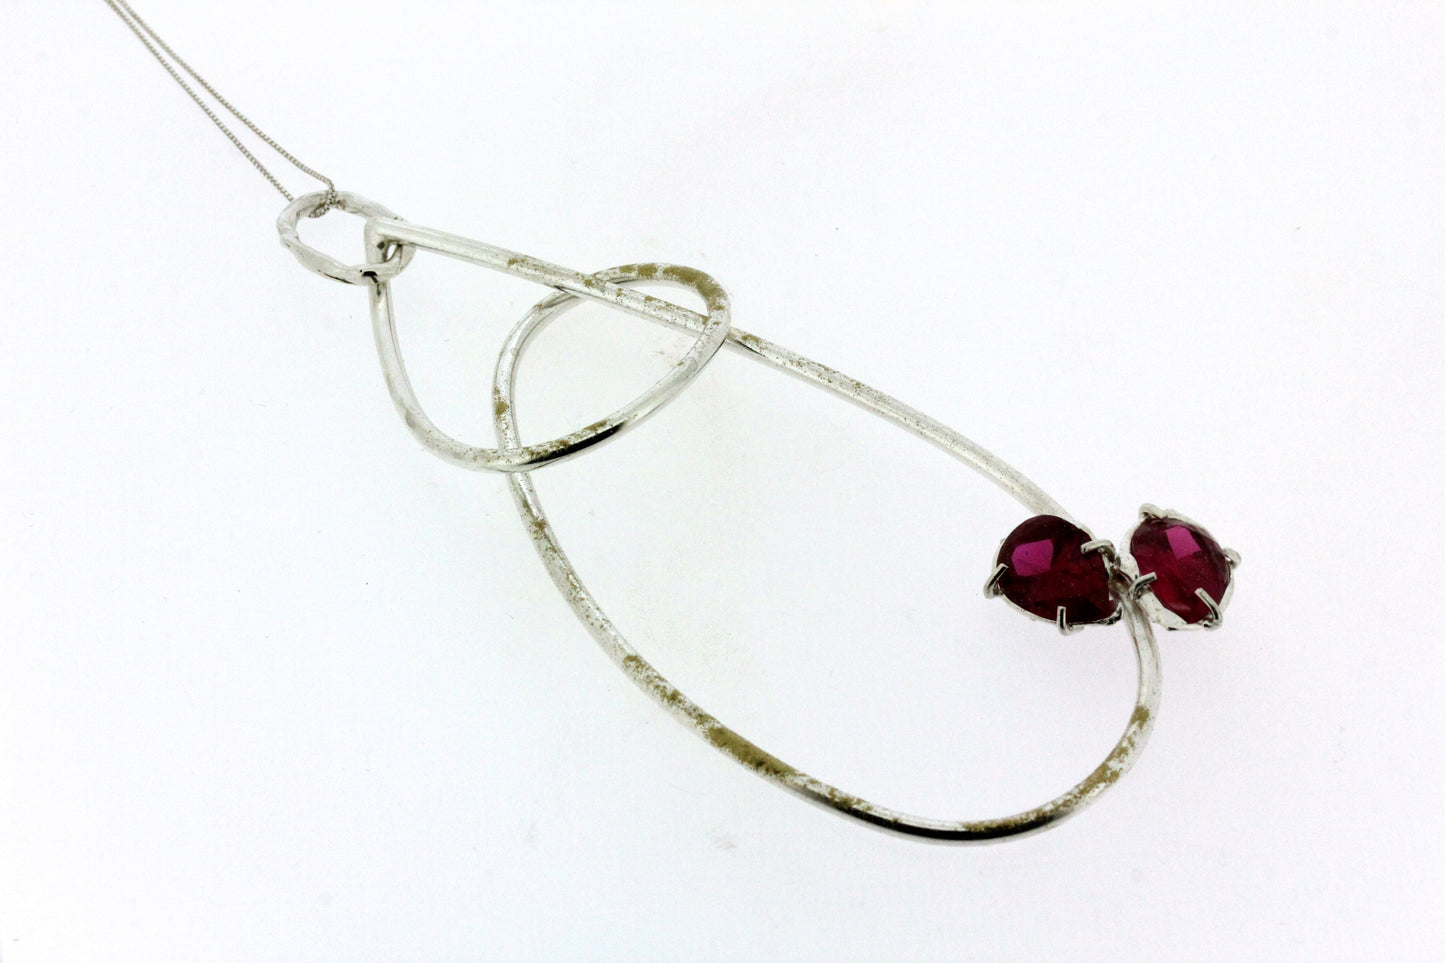 Close up view of pendant on Cindy Necklace. This large pendant is made of silver wire and resembles the shape of a wrapped teardrop with two set ruby's on the right side, there are also accents of gold powdercoat throughout the pendant.